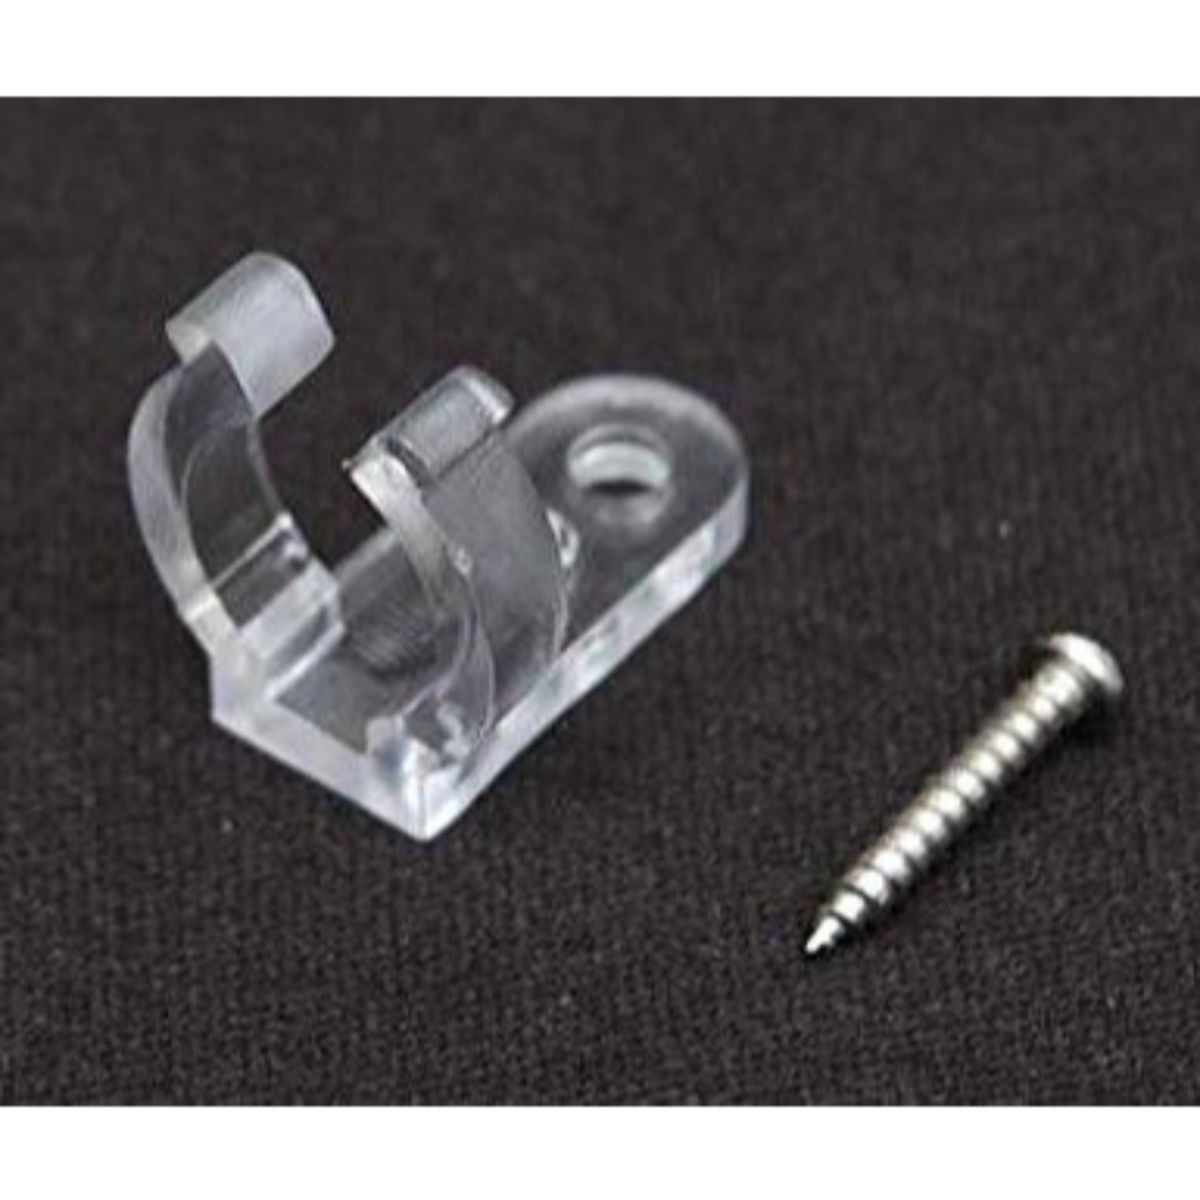 Flexbrite U-Shaped Mounting Clip with screw, Pack of 10